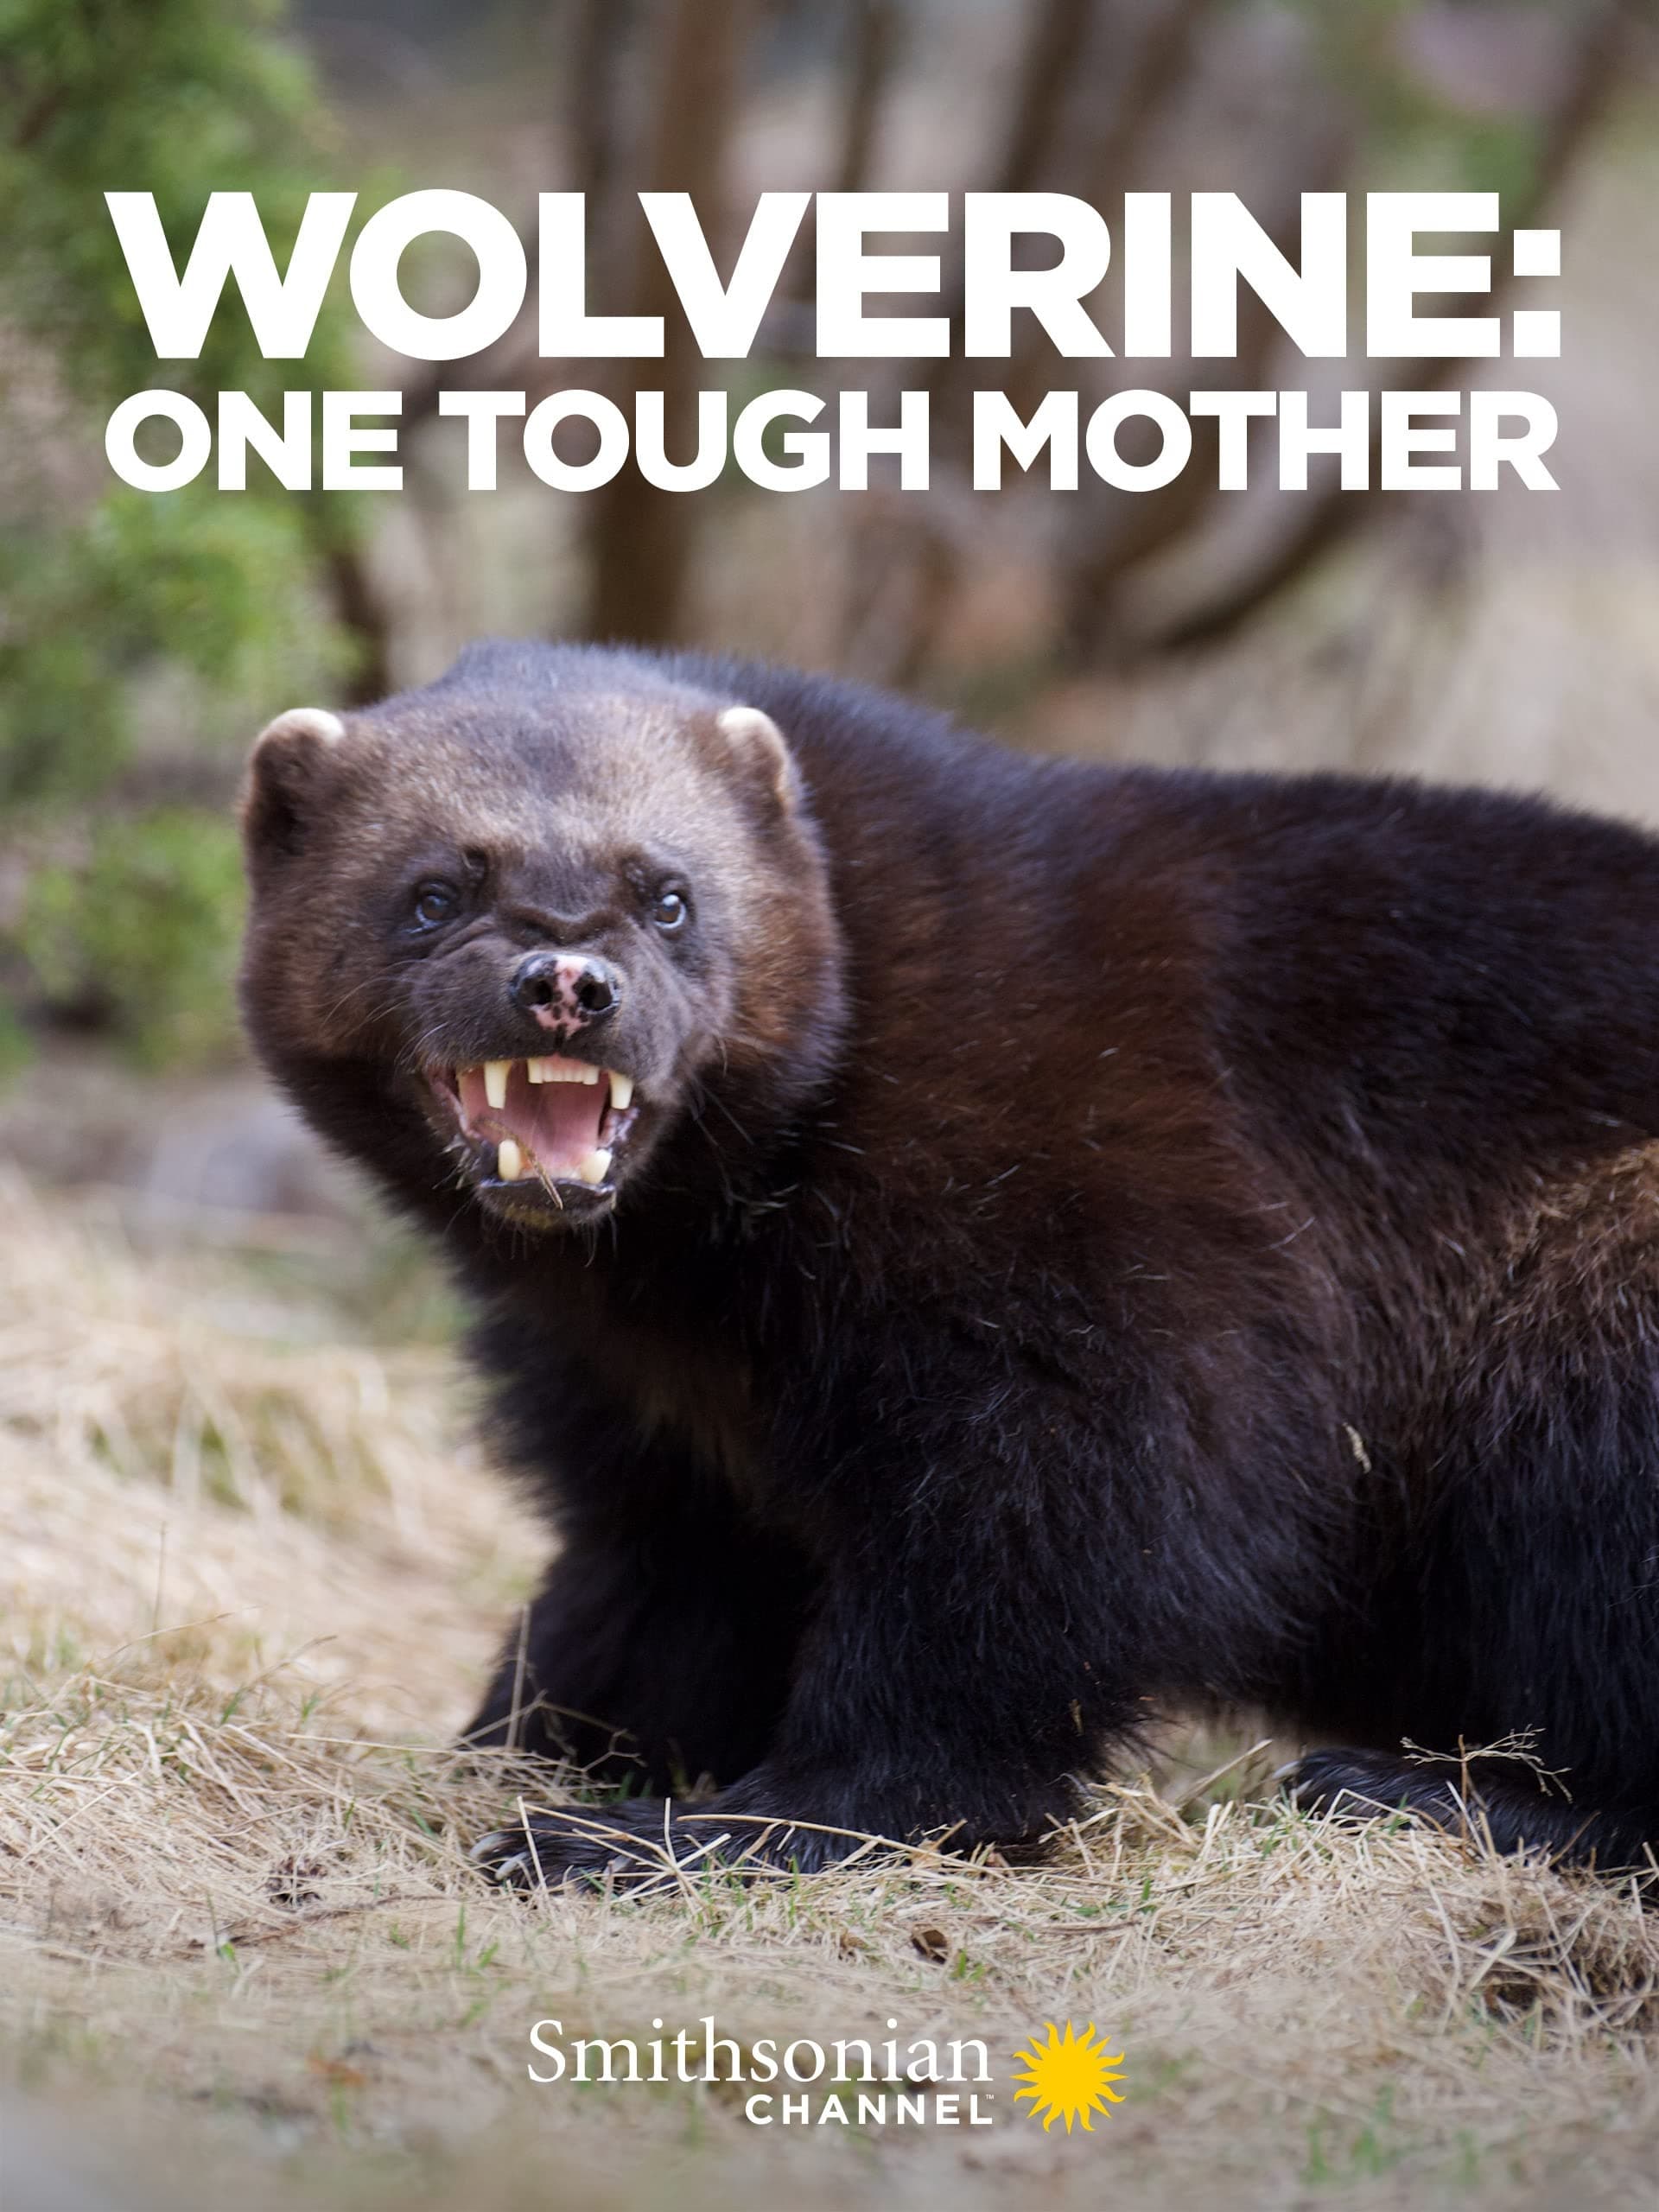 Wolverine: One Tough Mother